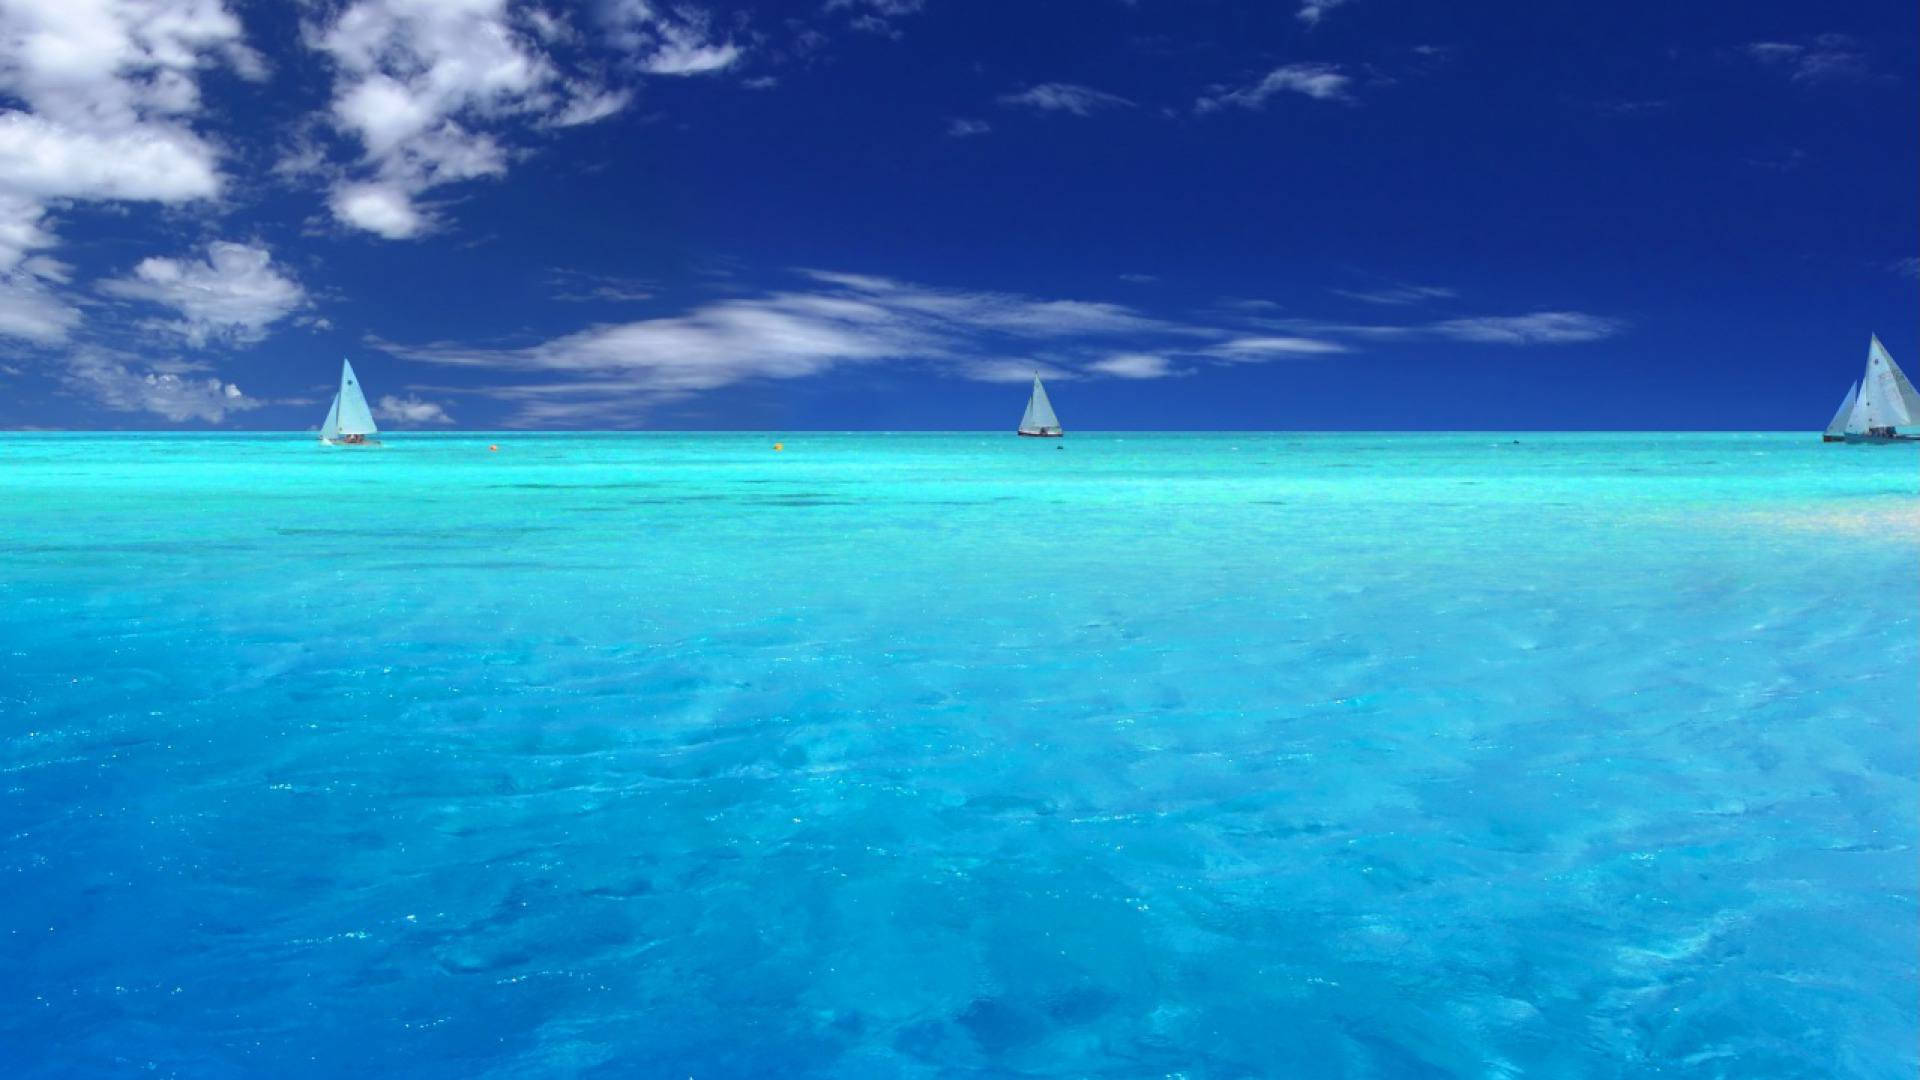 Explore the tranquil beauty of the Ocean Wallpaper